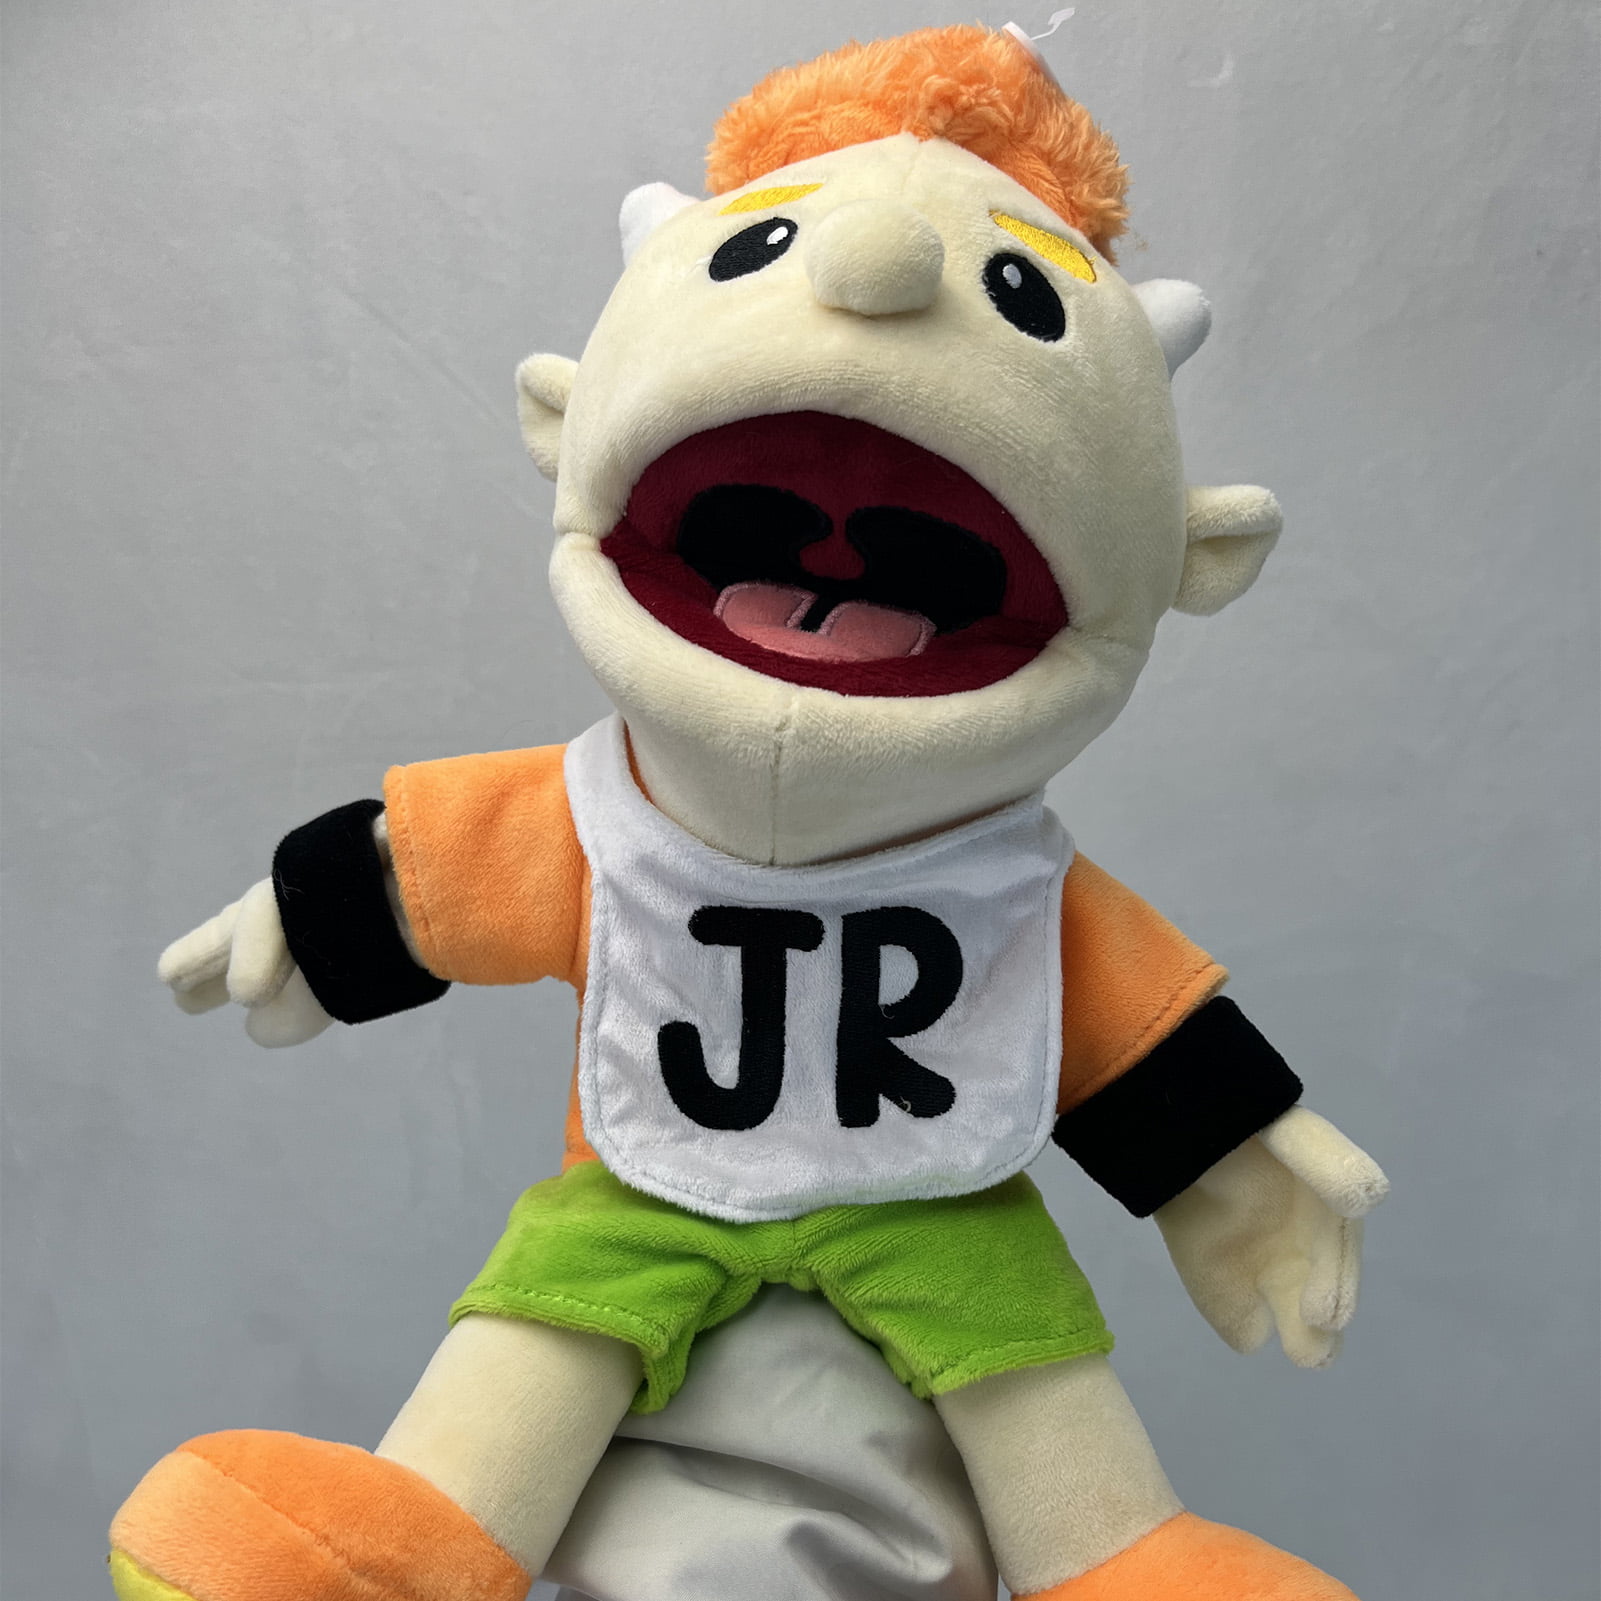 Jeffy Puppet Soft Stuffed Plush Toy Hand Puppet for Play House